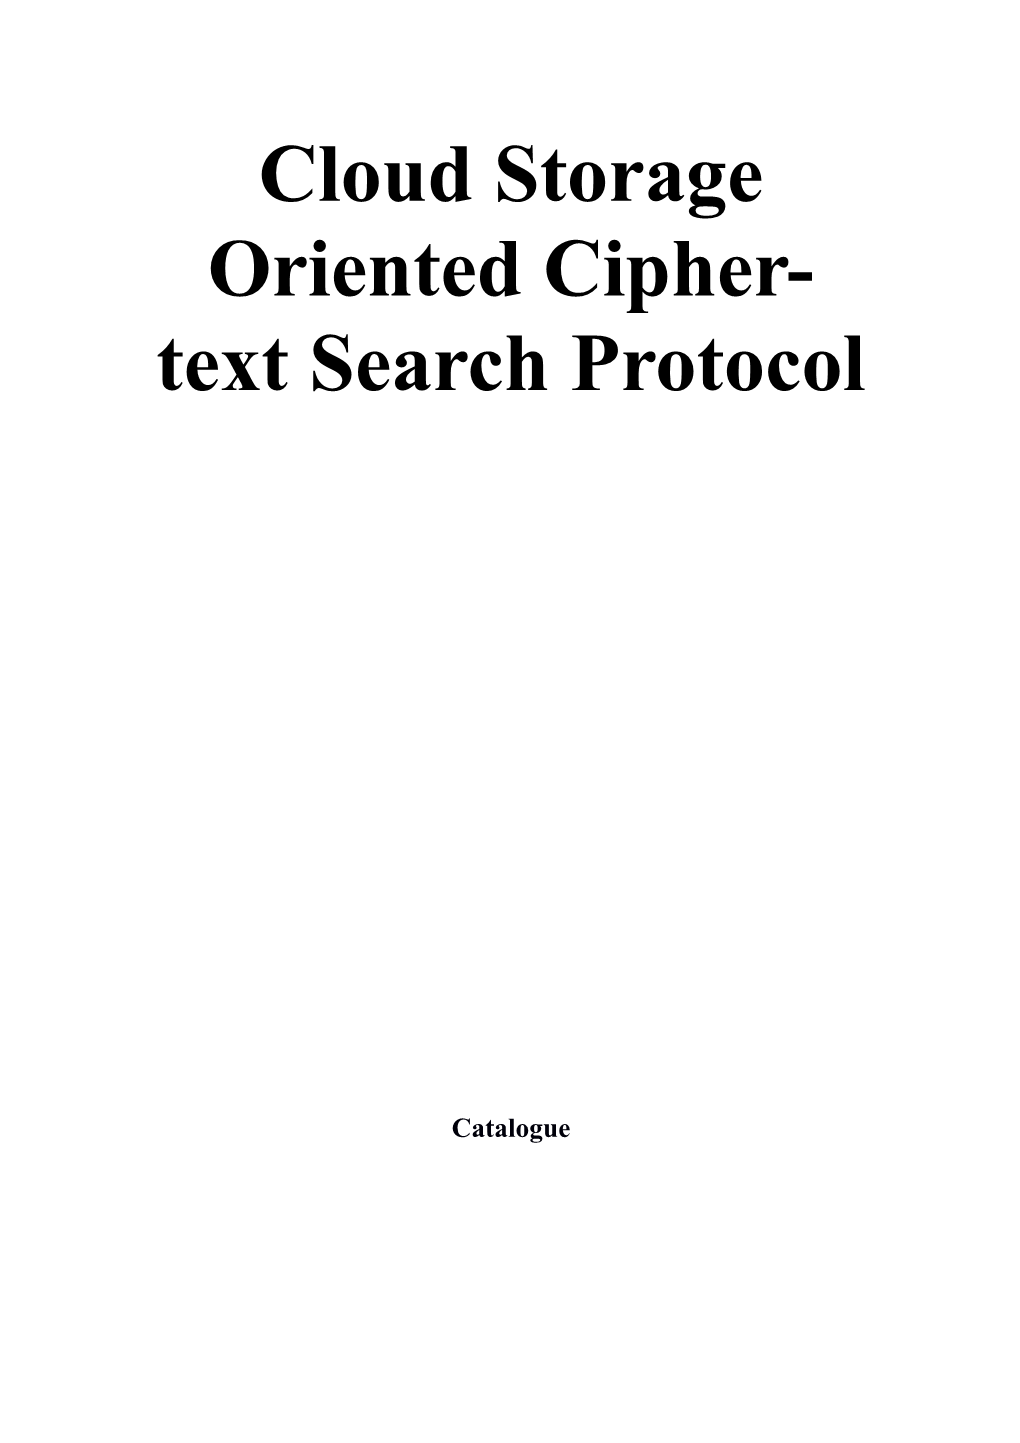 Cloud Storage Oriented Cipher-Text Search Protocol